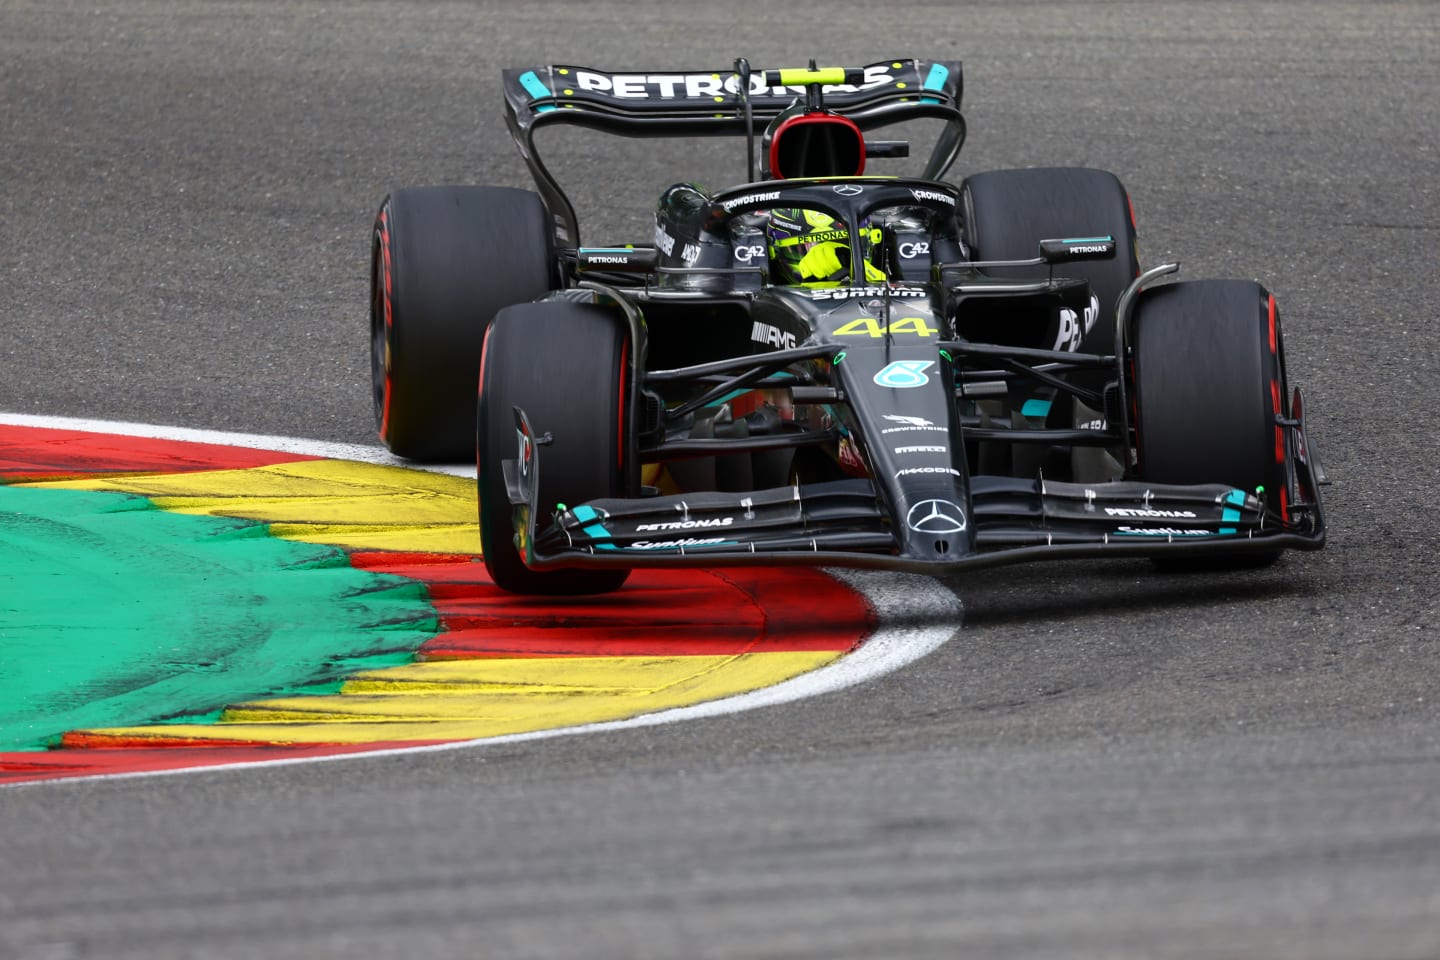 SPA, BELGIUM - JULY 30: Lewis Hamilton of Great Britain driving the (44) Mercedes AMG Petronas F1